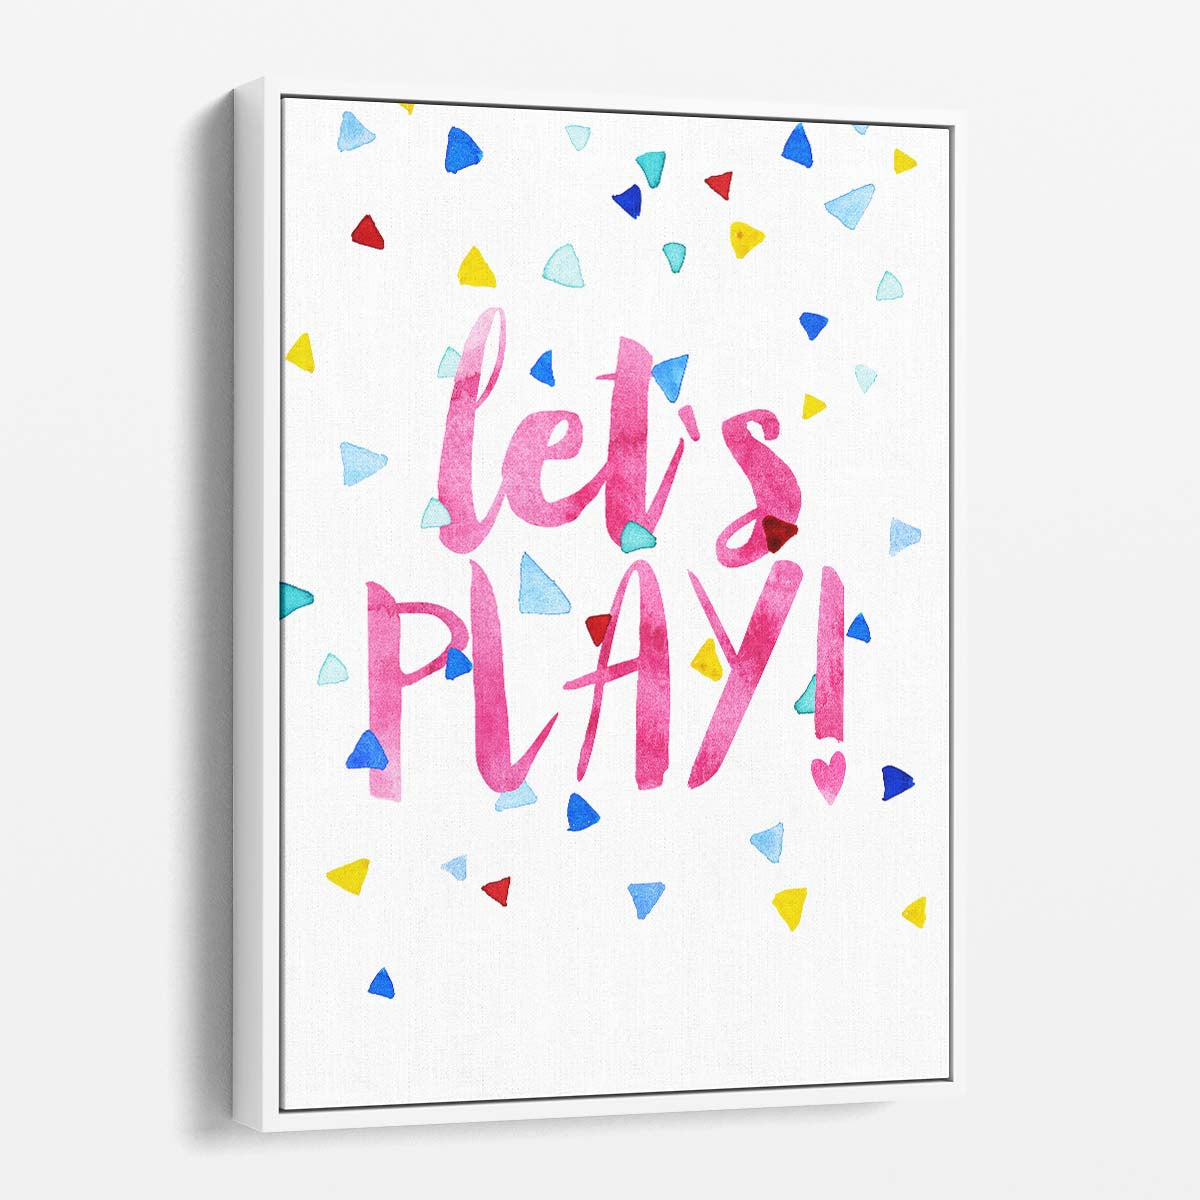 Colorful, Inspirational Kids Room Wall Art - 'Let's Play!' by Treechild by Luxuriance Designs, made in USA